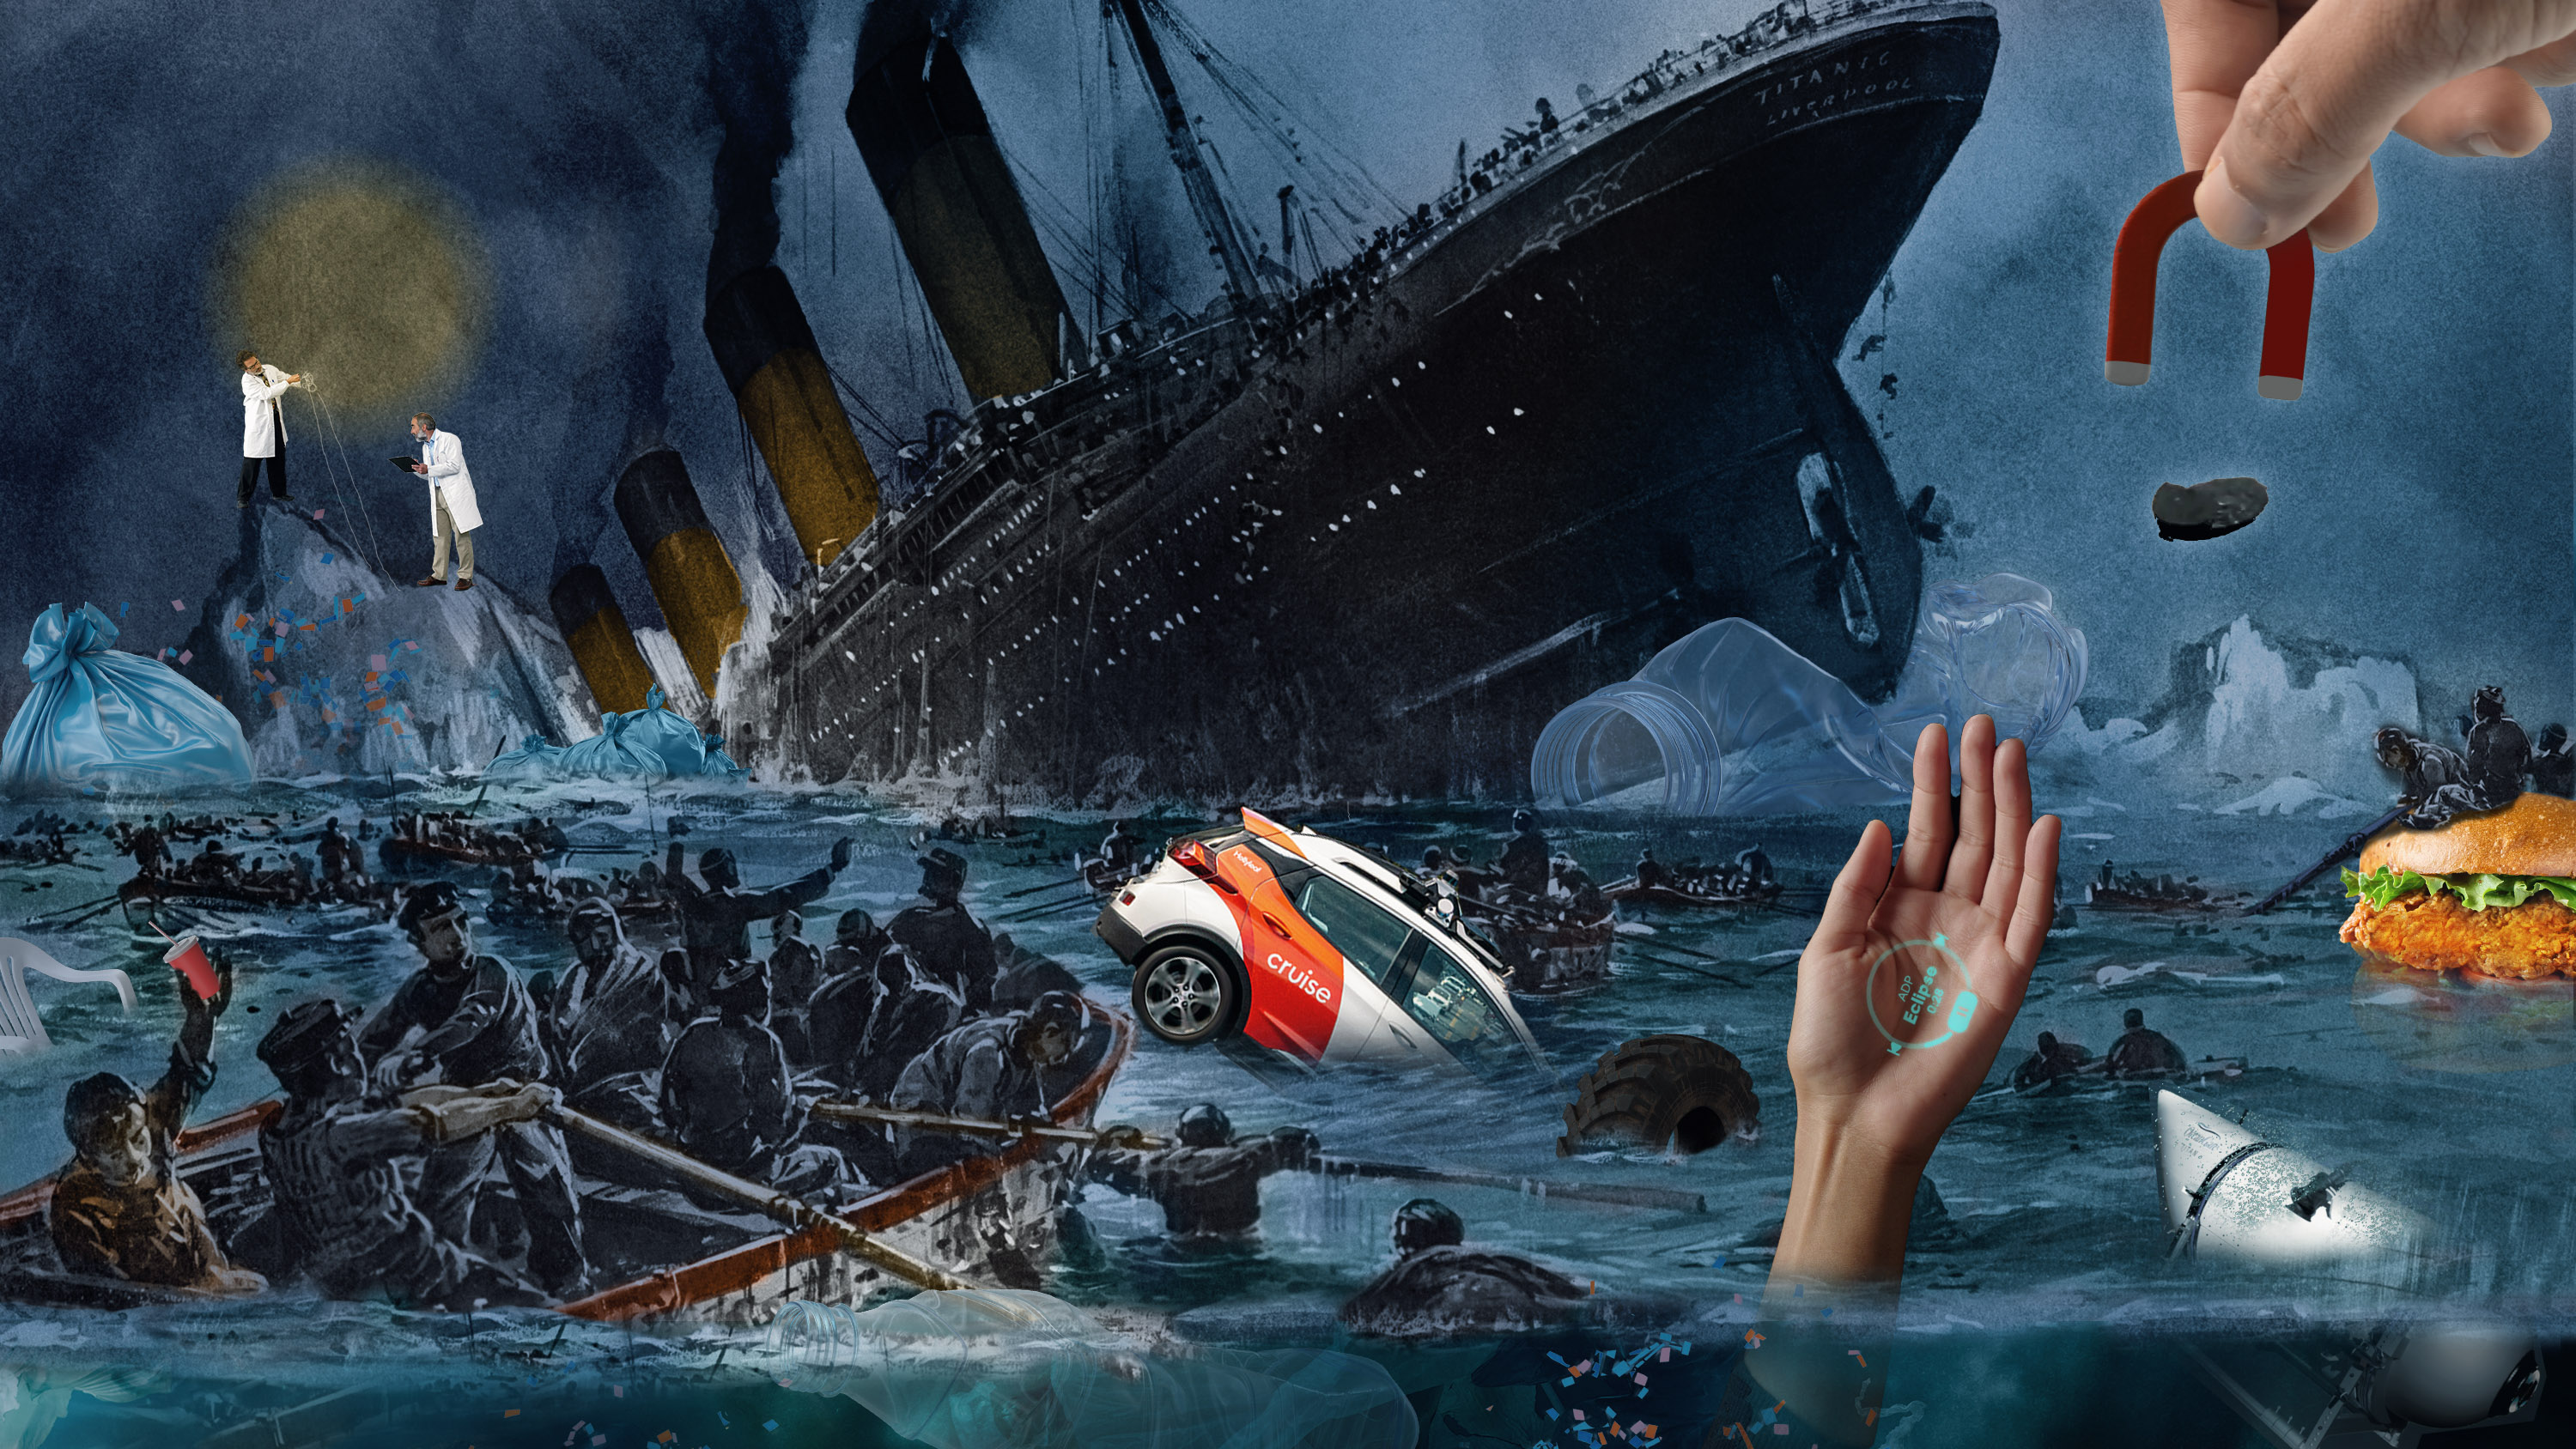 watercolor of the Titanic by Stower with some terrible technologies sinking around it including a Cruise vehicle, a labgrown chicken sandwich, plastic bags and bottles, microplastics and the Titan submersible, and an outstretched hand with a projection from the AI Pin